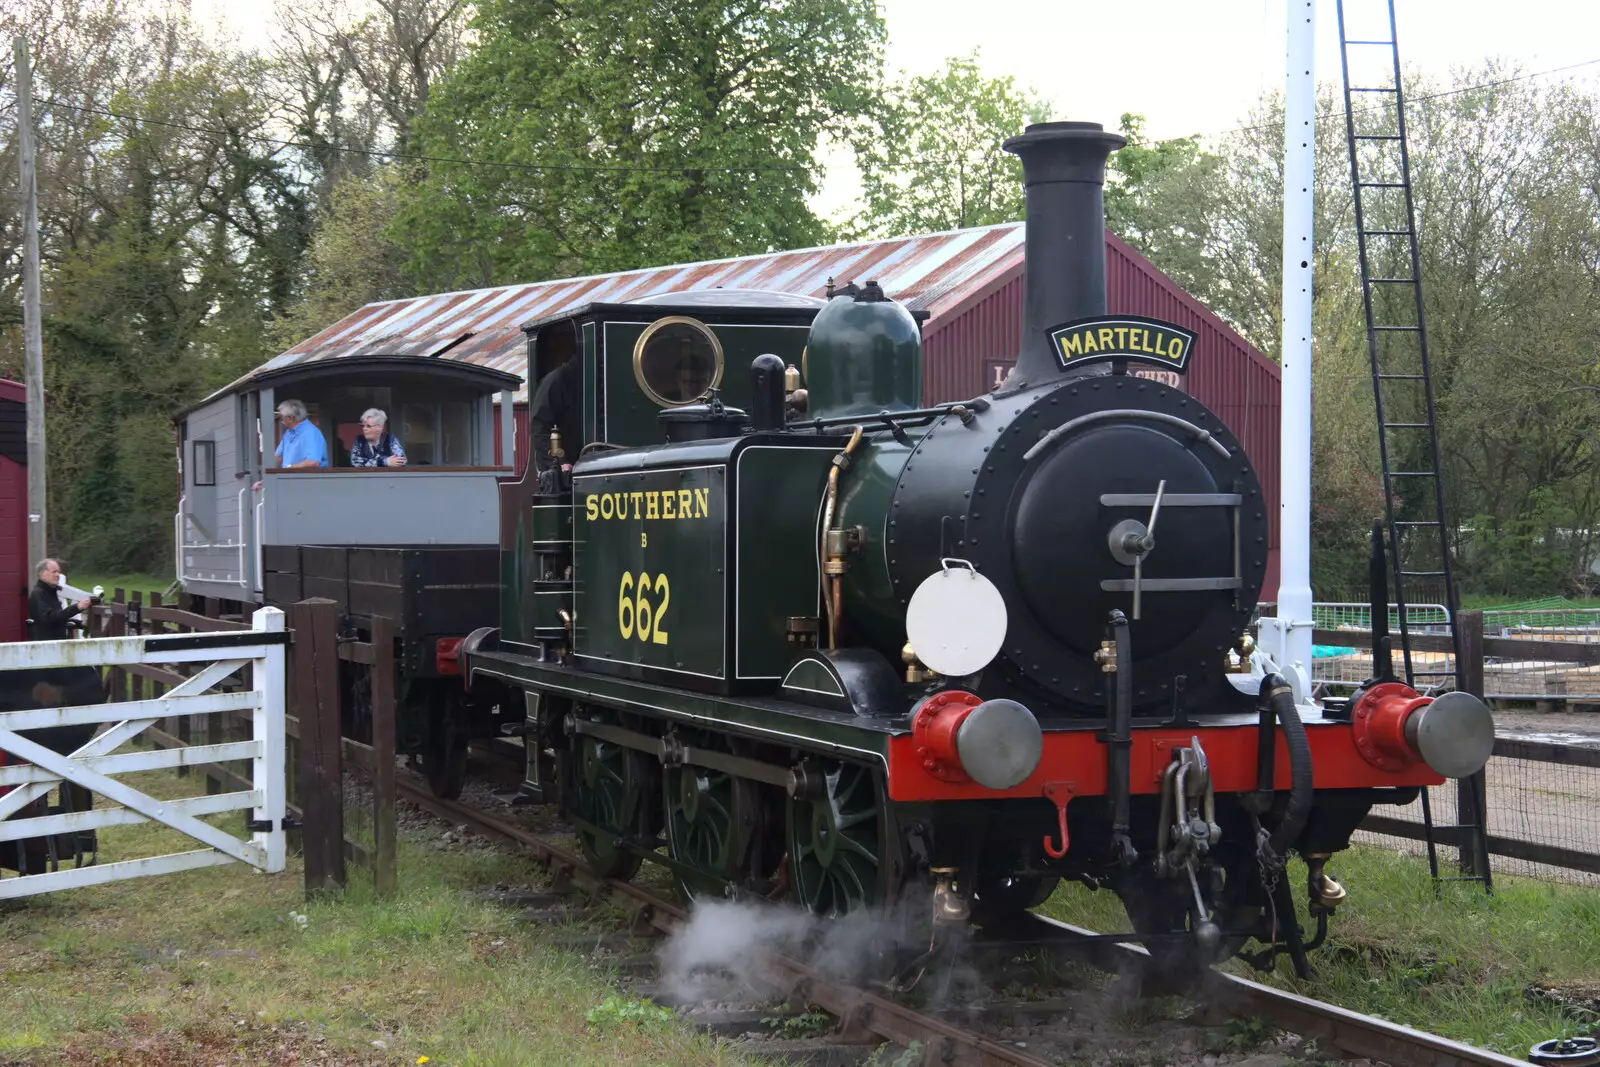 Another view of 662 Southern Martello, from The Heritage Steam Gala, Bressingham Steam Museum, Norfolk - 1st May 2023